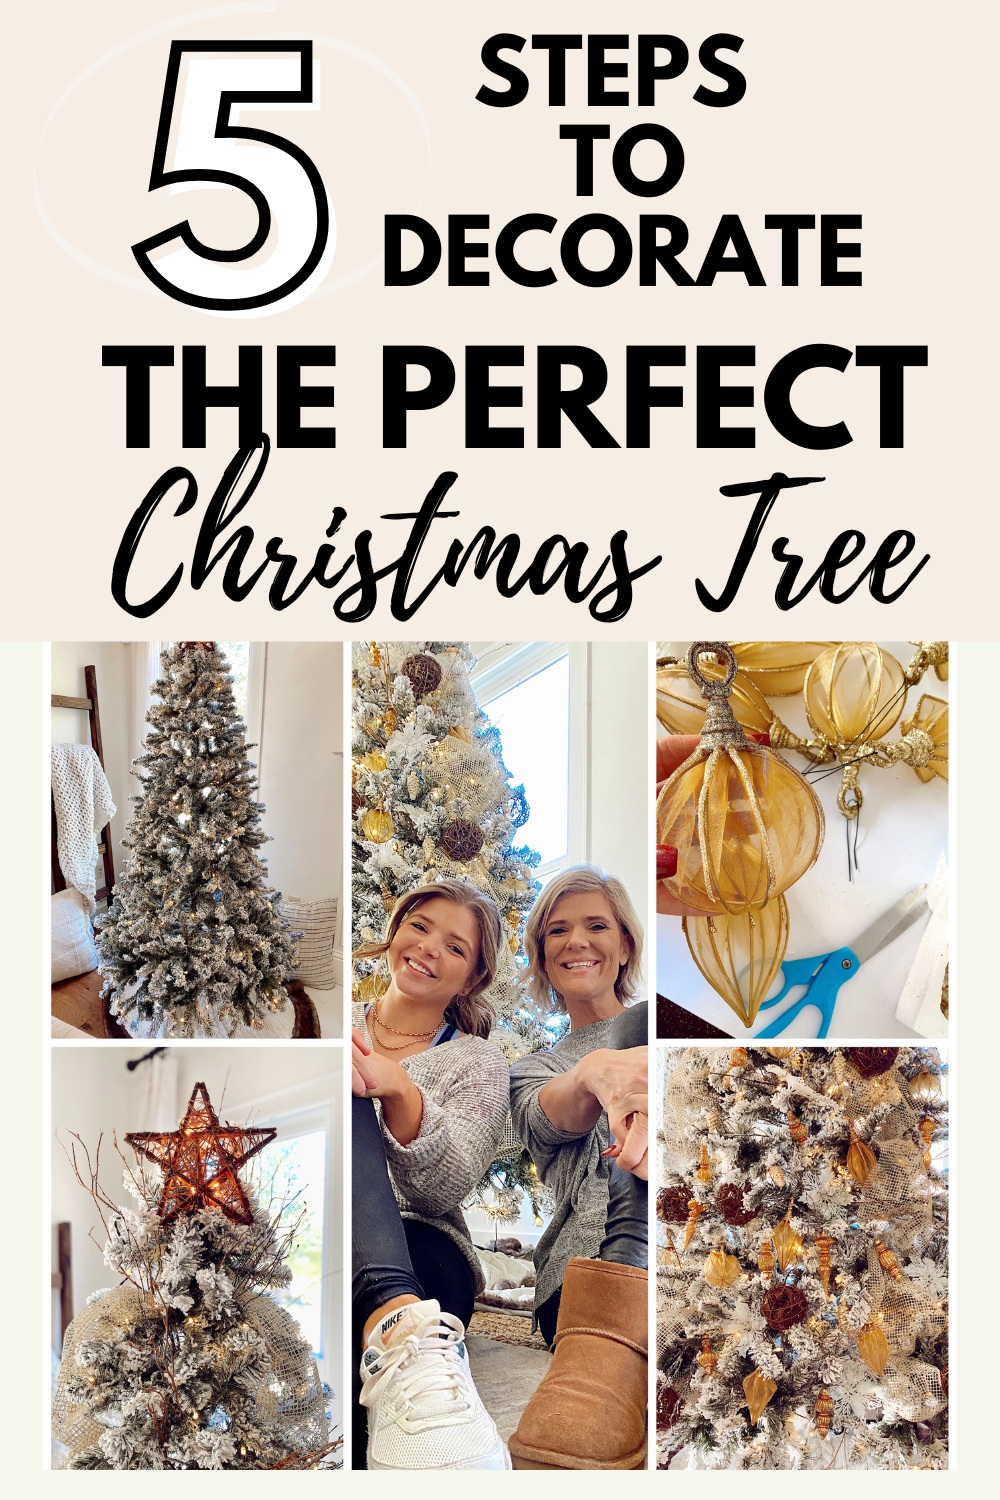 5 STEPS TO DECORATE THE PERFECT CHRISTMAS TREE